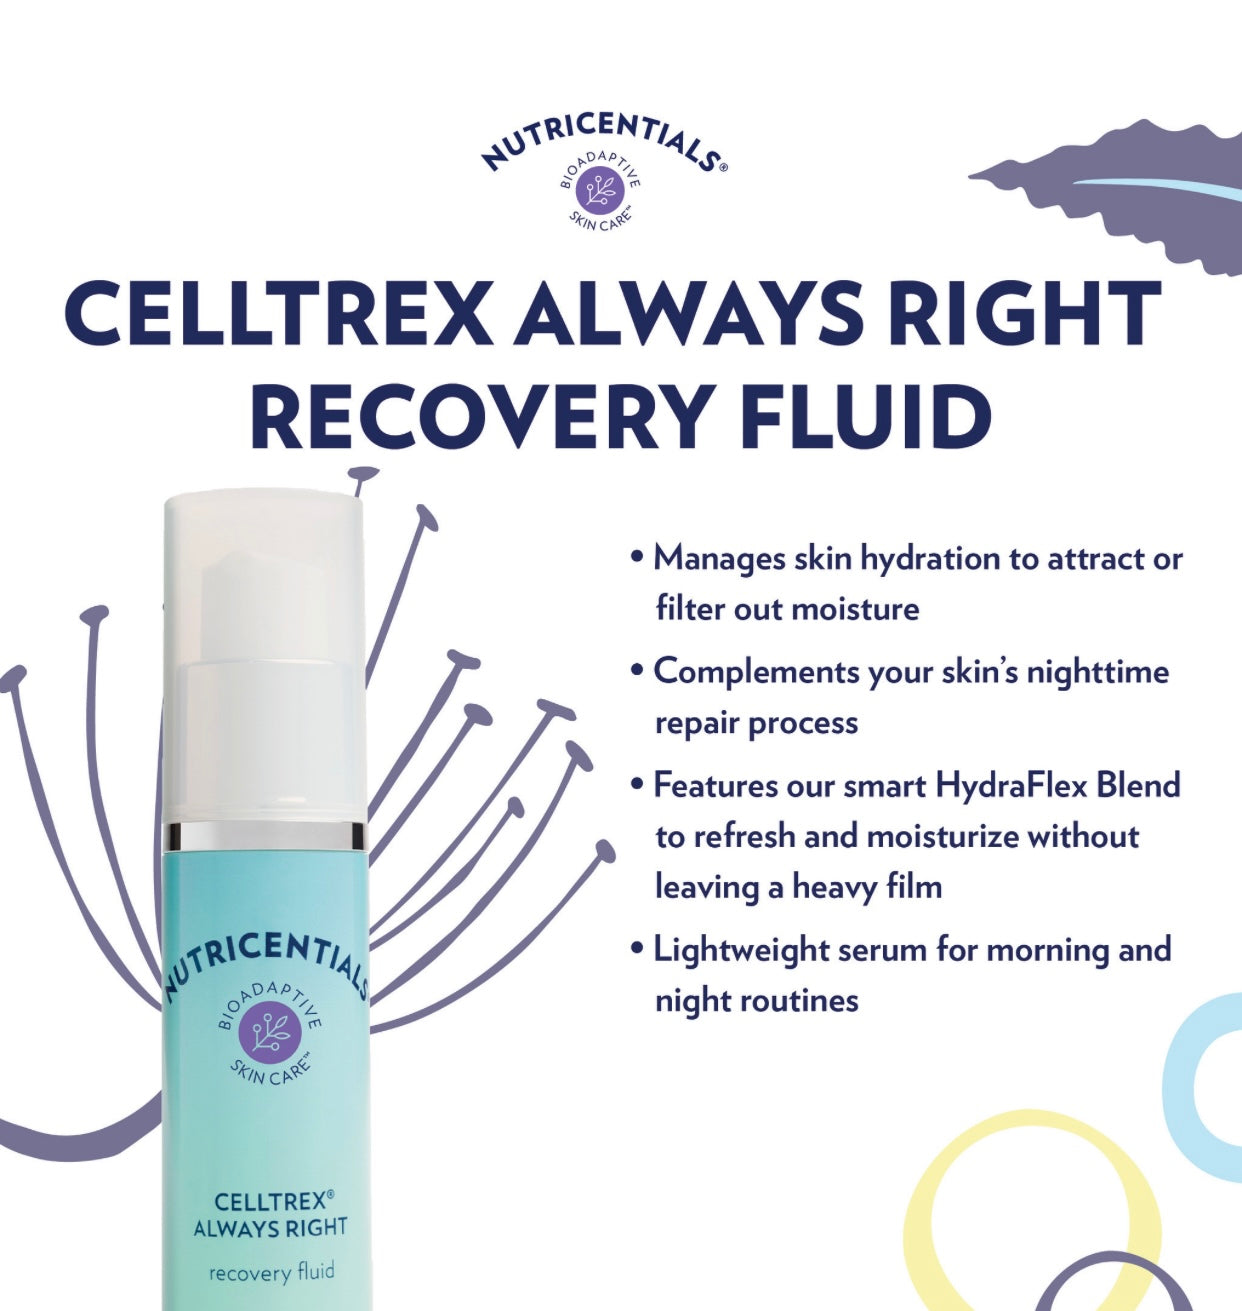 Celltrex Always Right Recovery Fluid